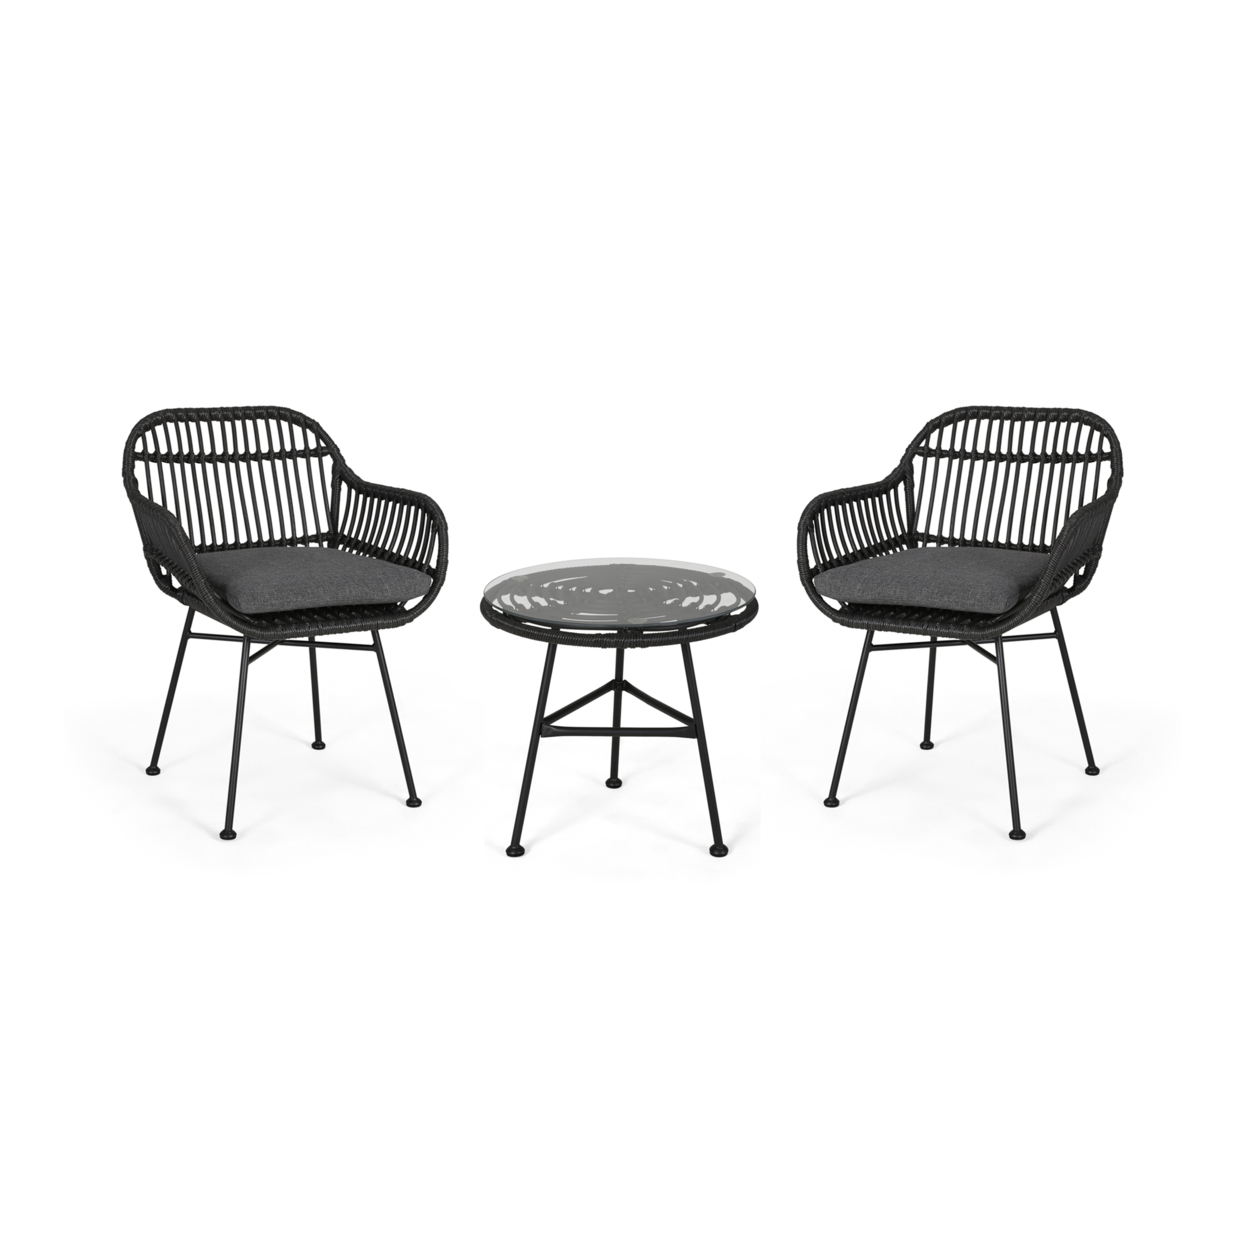 Lesley Outdoor Faux Wicker 2 Seater Chat Set With Tempered Glass Table - Gray, Dark Gray, Black